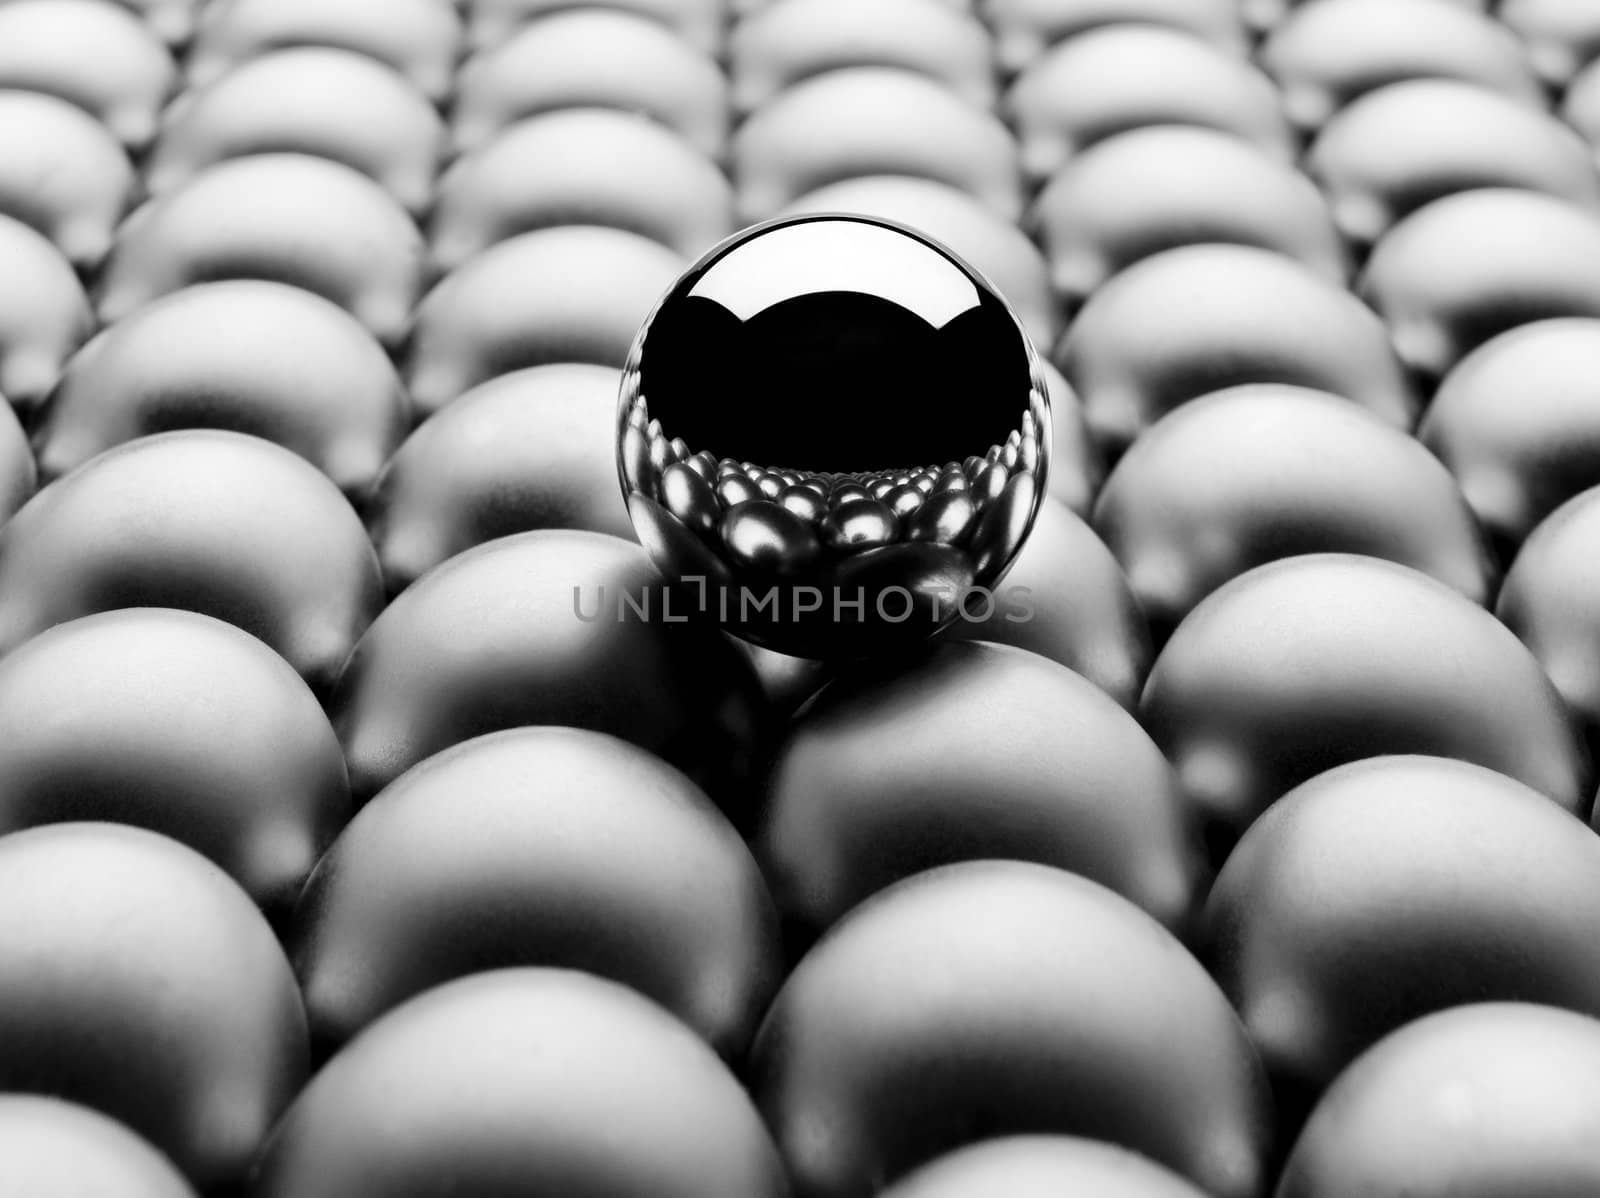 One ball stands out. by pbombaert